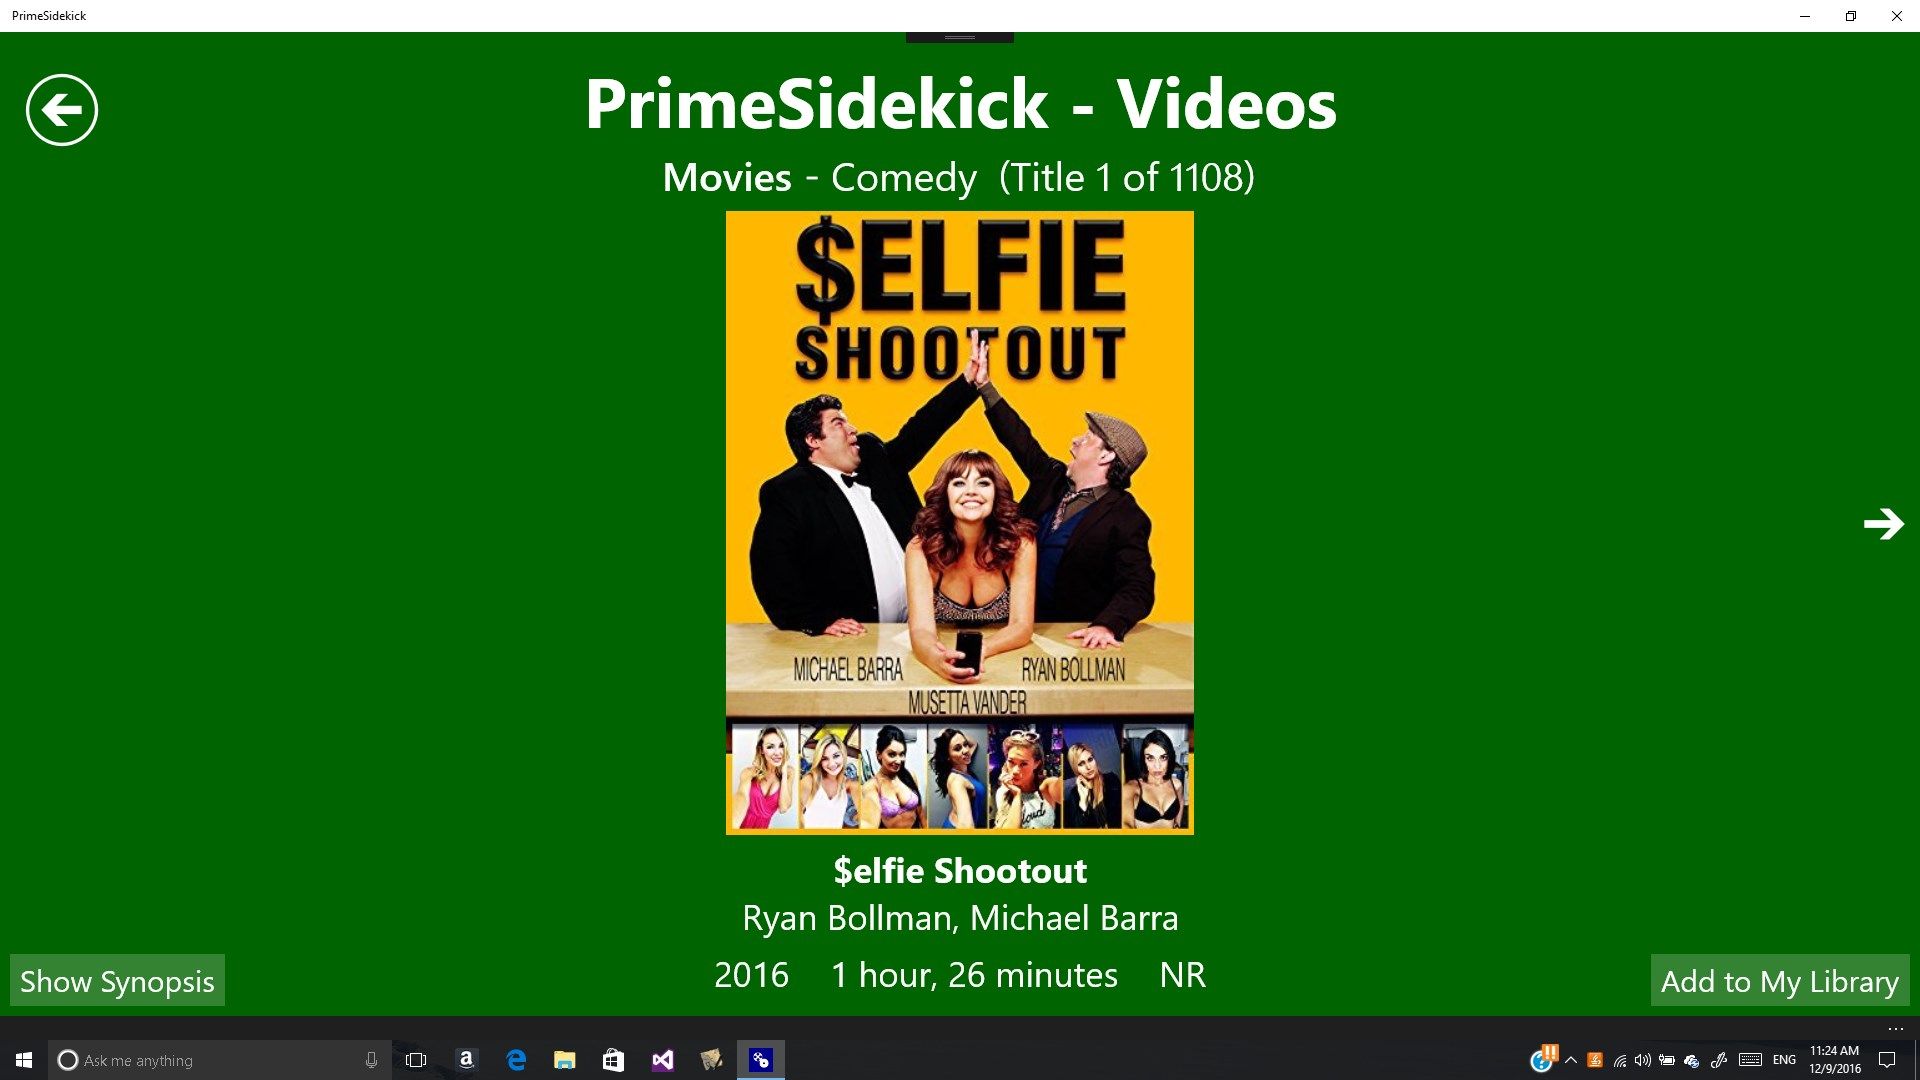 Video title details screen showing information about the selected title. The users can use the arrows on the left and right side of this screen to switch to the previous or next title, respectively.
Tapping (or clicking) on the title image will bring up the Amazon web page for the title.